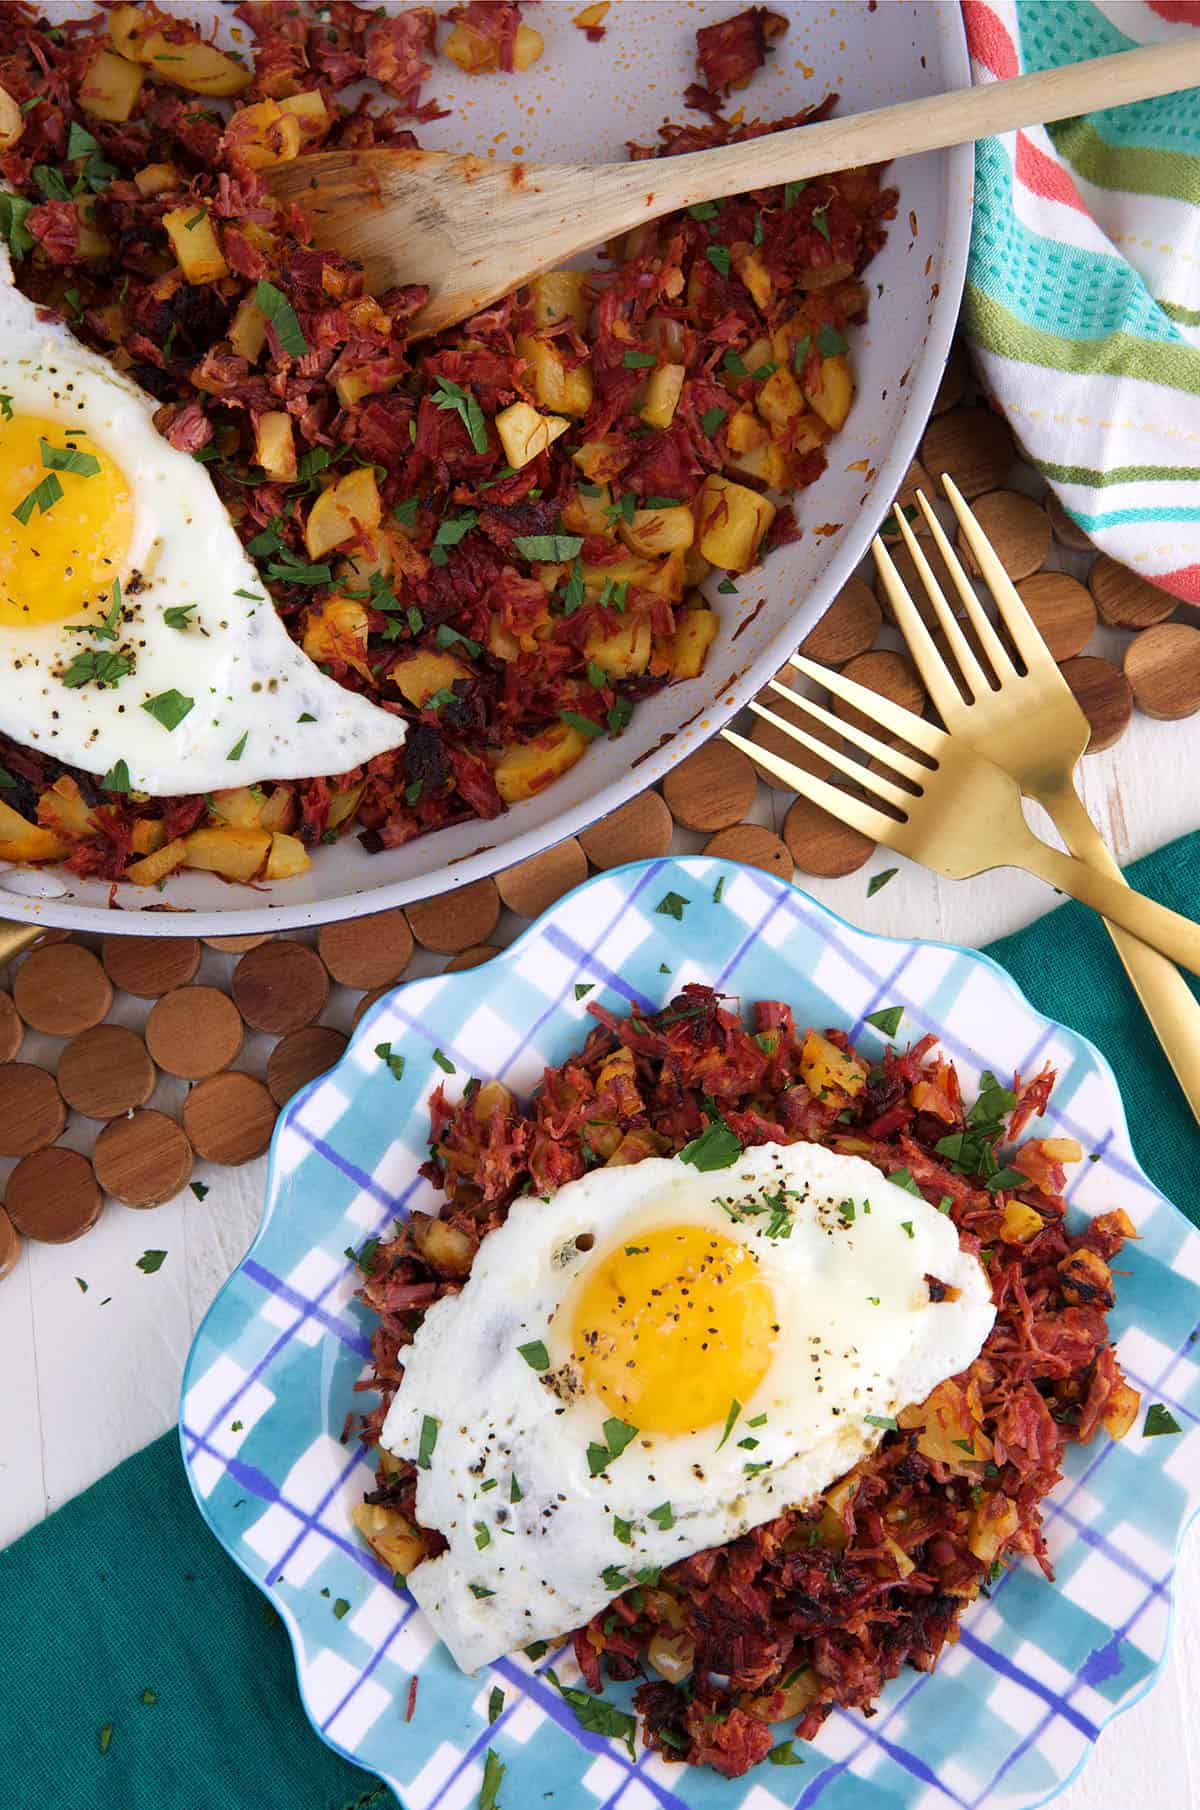 An egg is placed on top of a serving of hash next to a skillet filled with more hash.